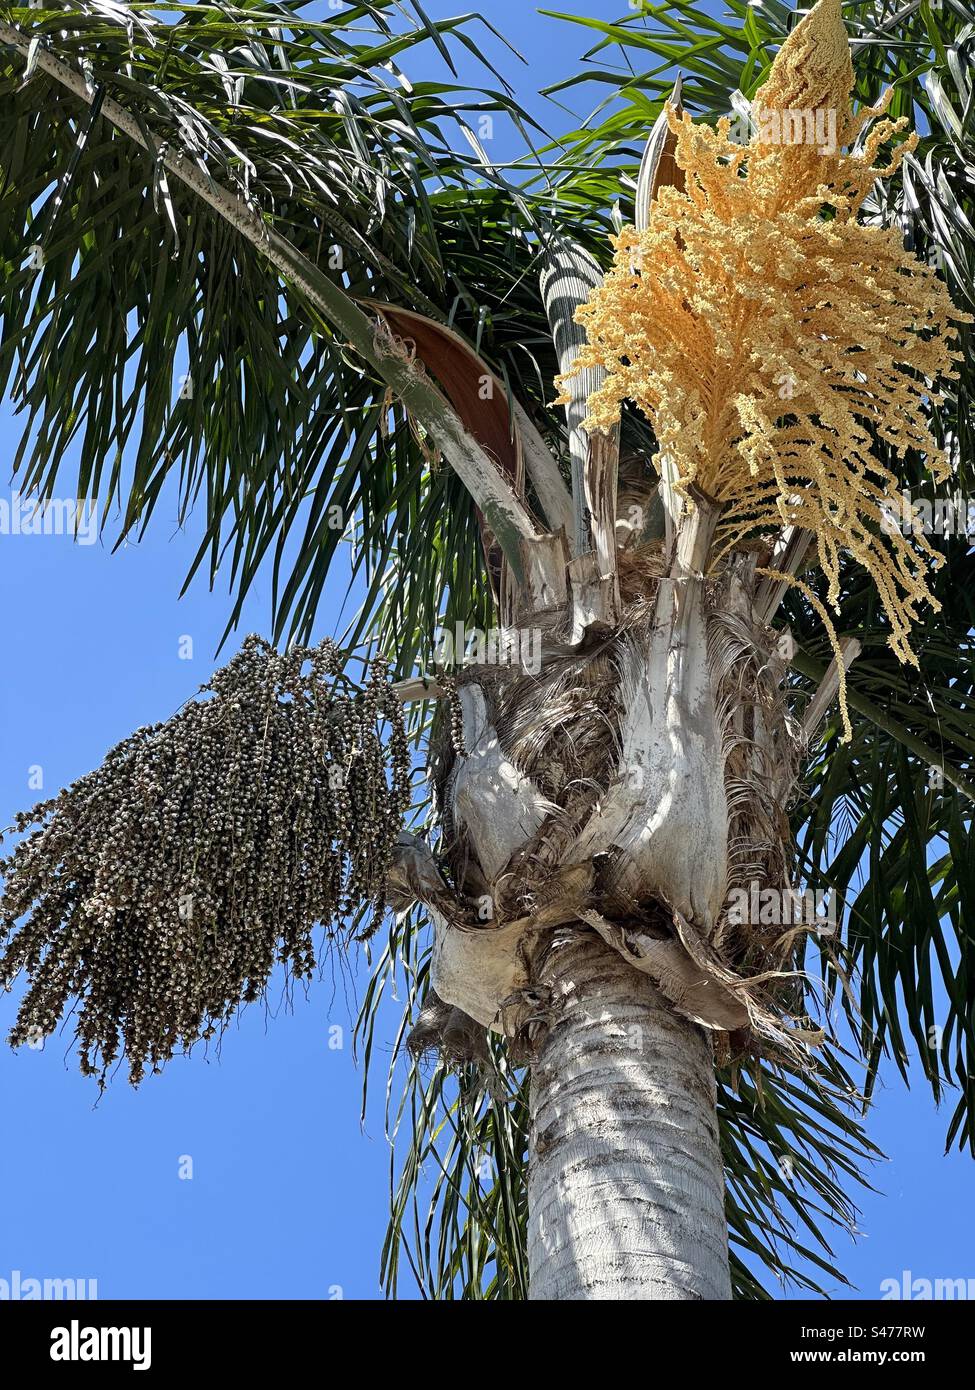 Queen palm or cocos palm (Syragrus romanzoffiana) fronds, flowers, and fruit. Stock Photo